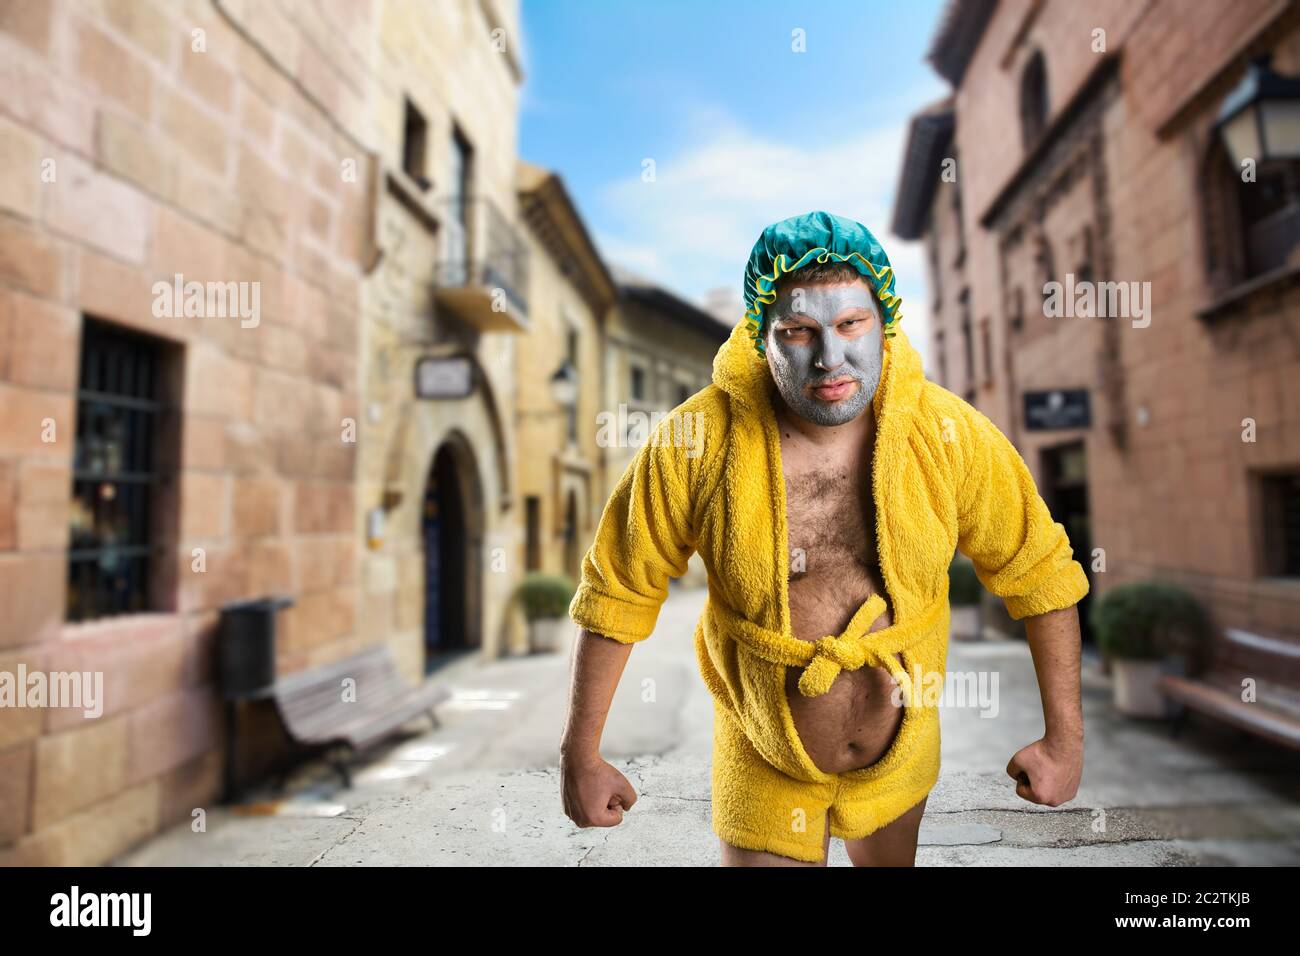 Strange, crazy man with face pack walking in the street Stock Photo